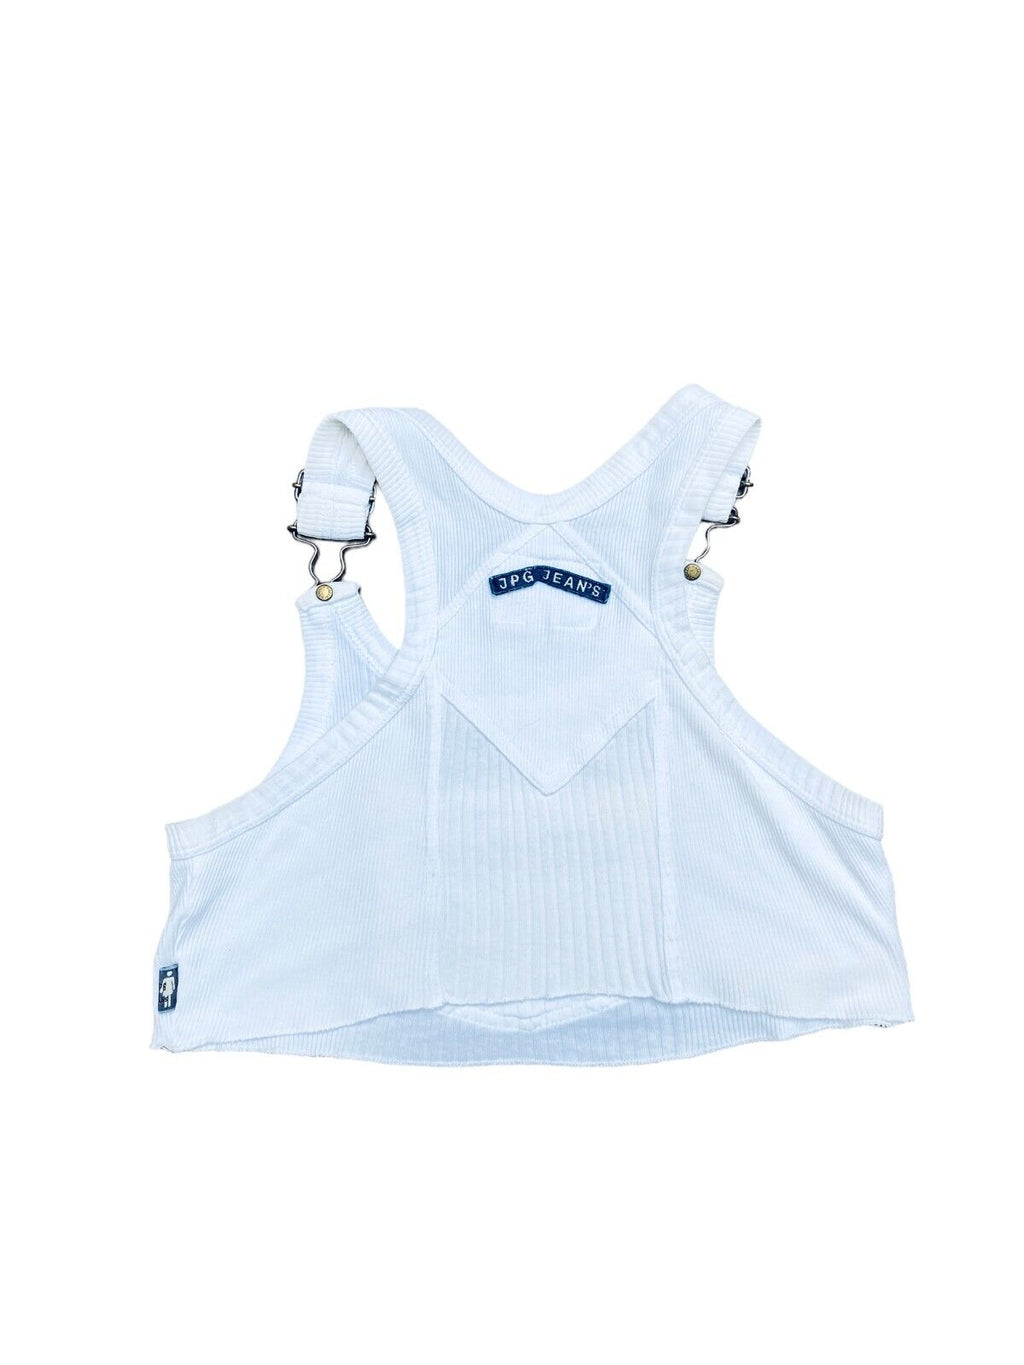 White Dungarees Crop Top Size S